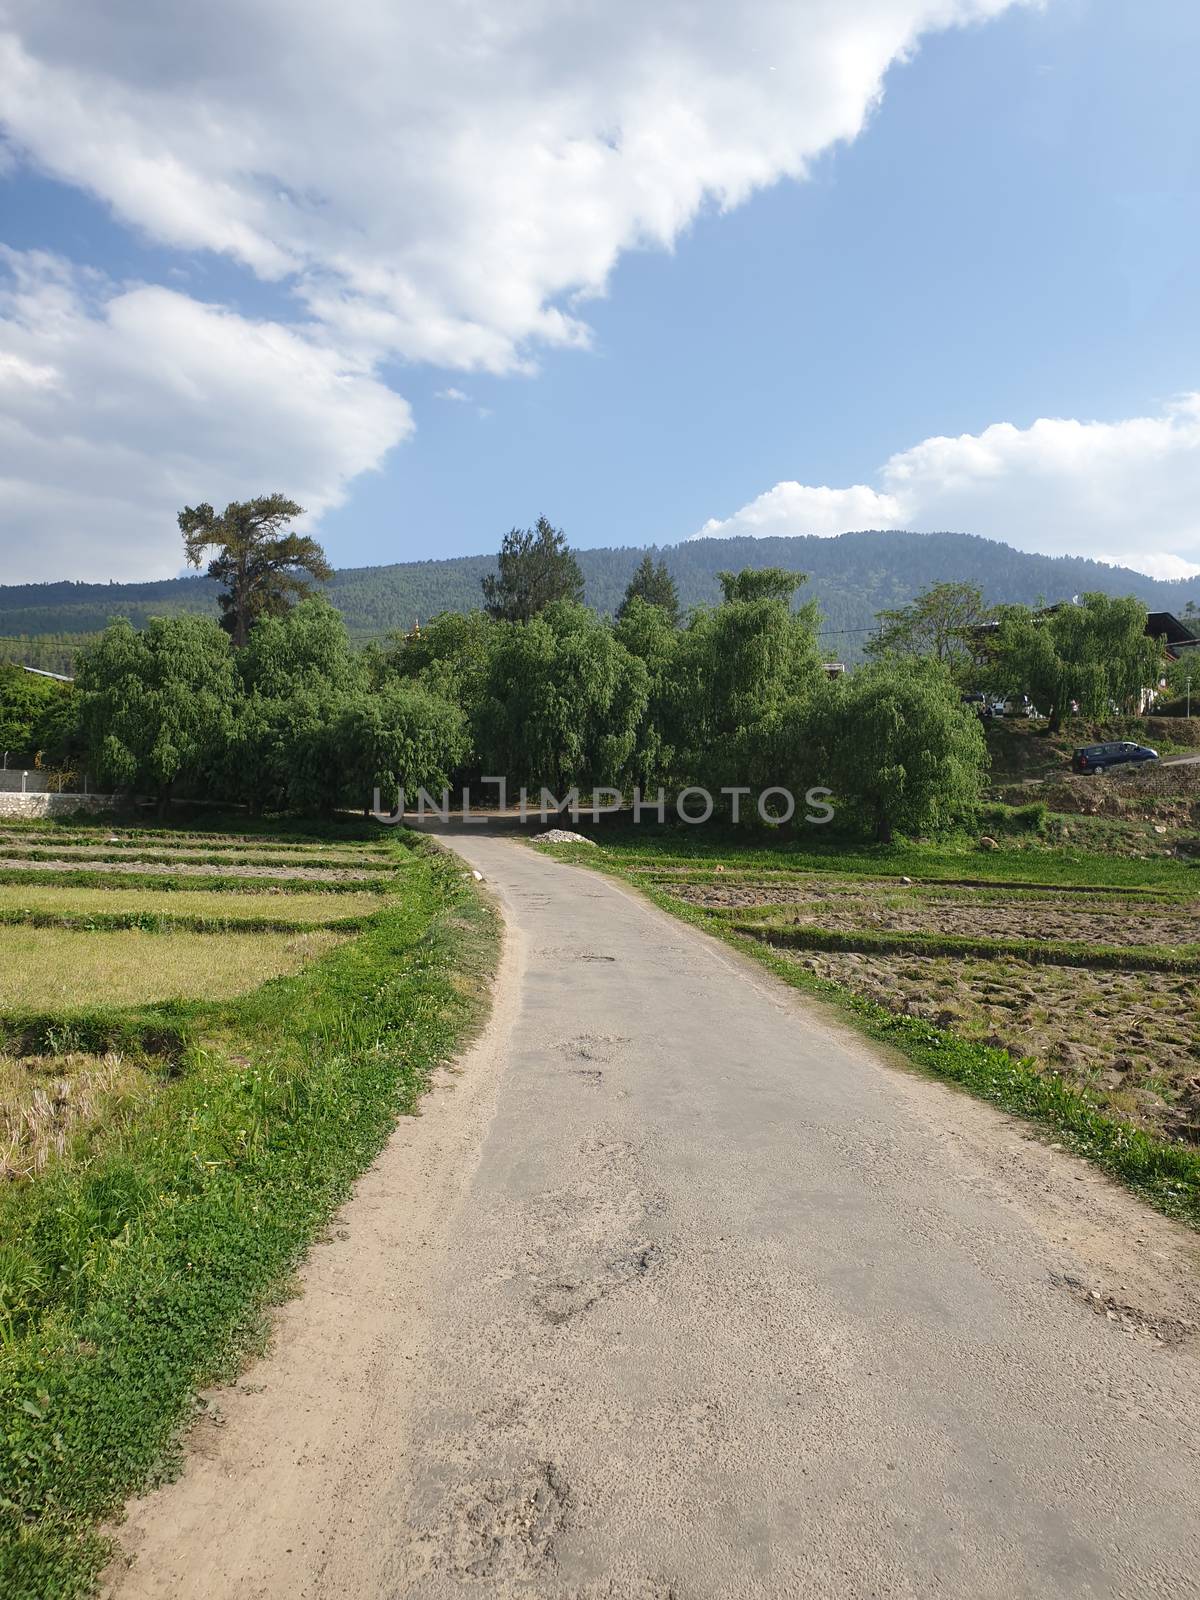 A beautiful countryside road in the Himalayas, in the country of Bhutan.